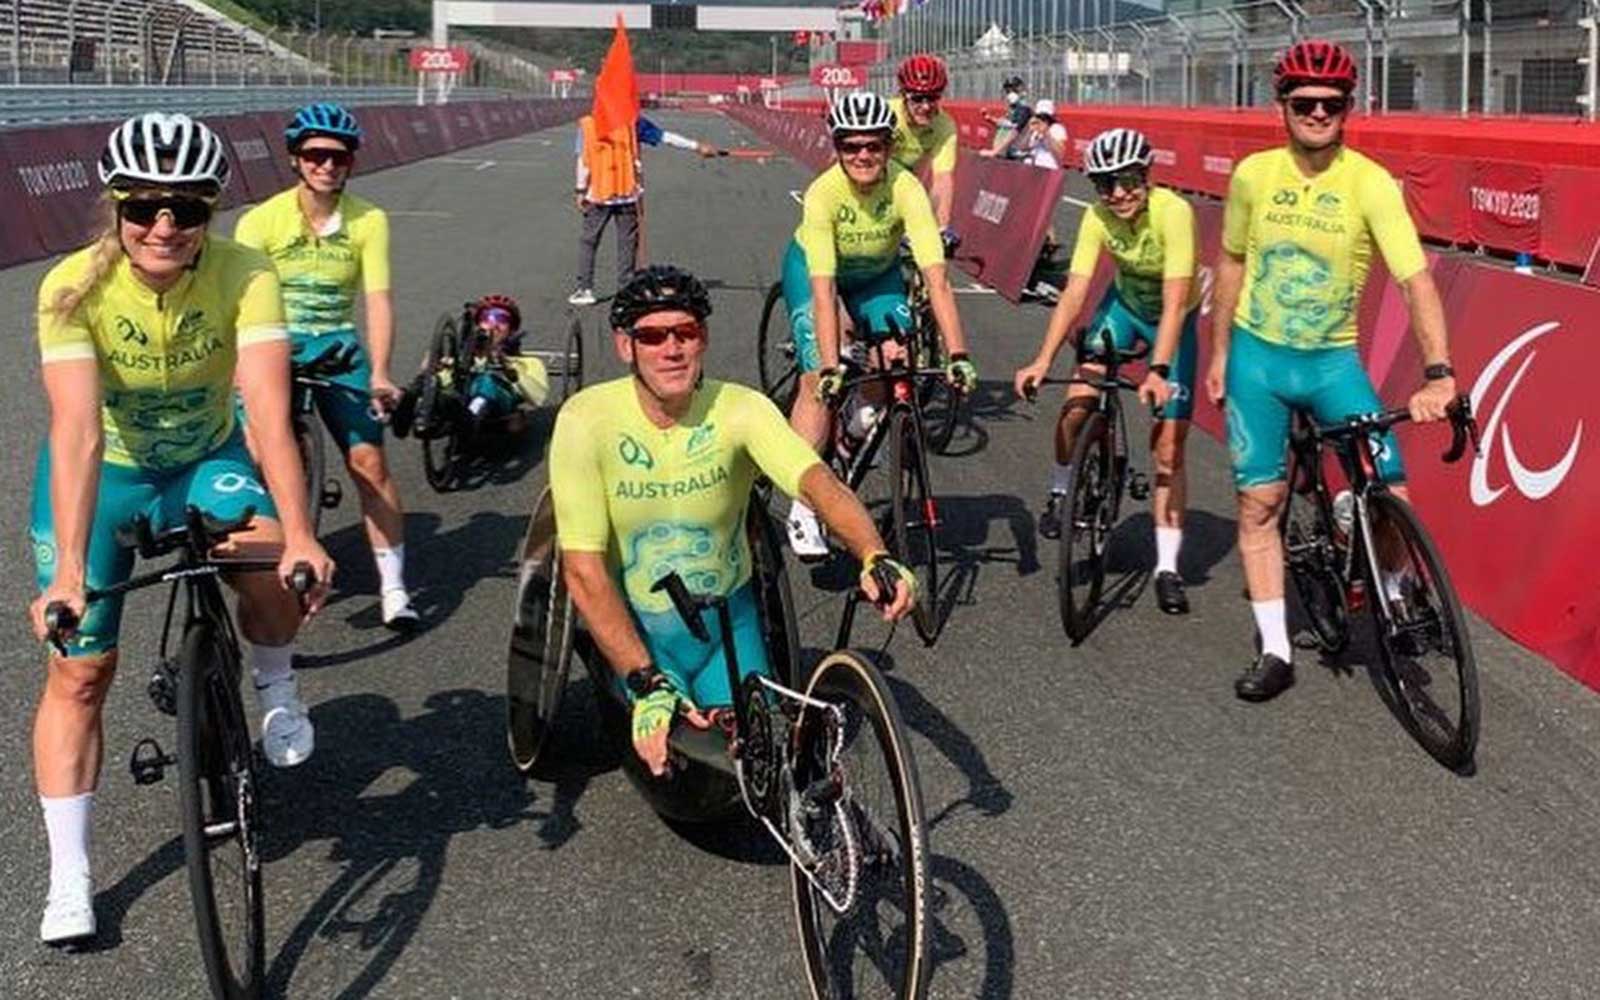 Ten time trial Aussies in action on Fuji Speedway